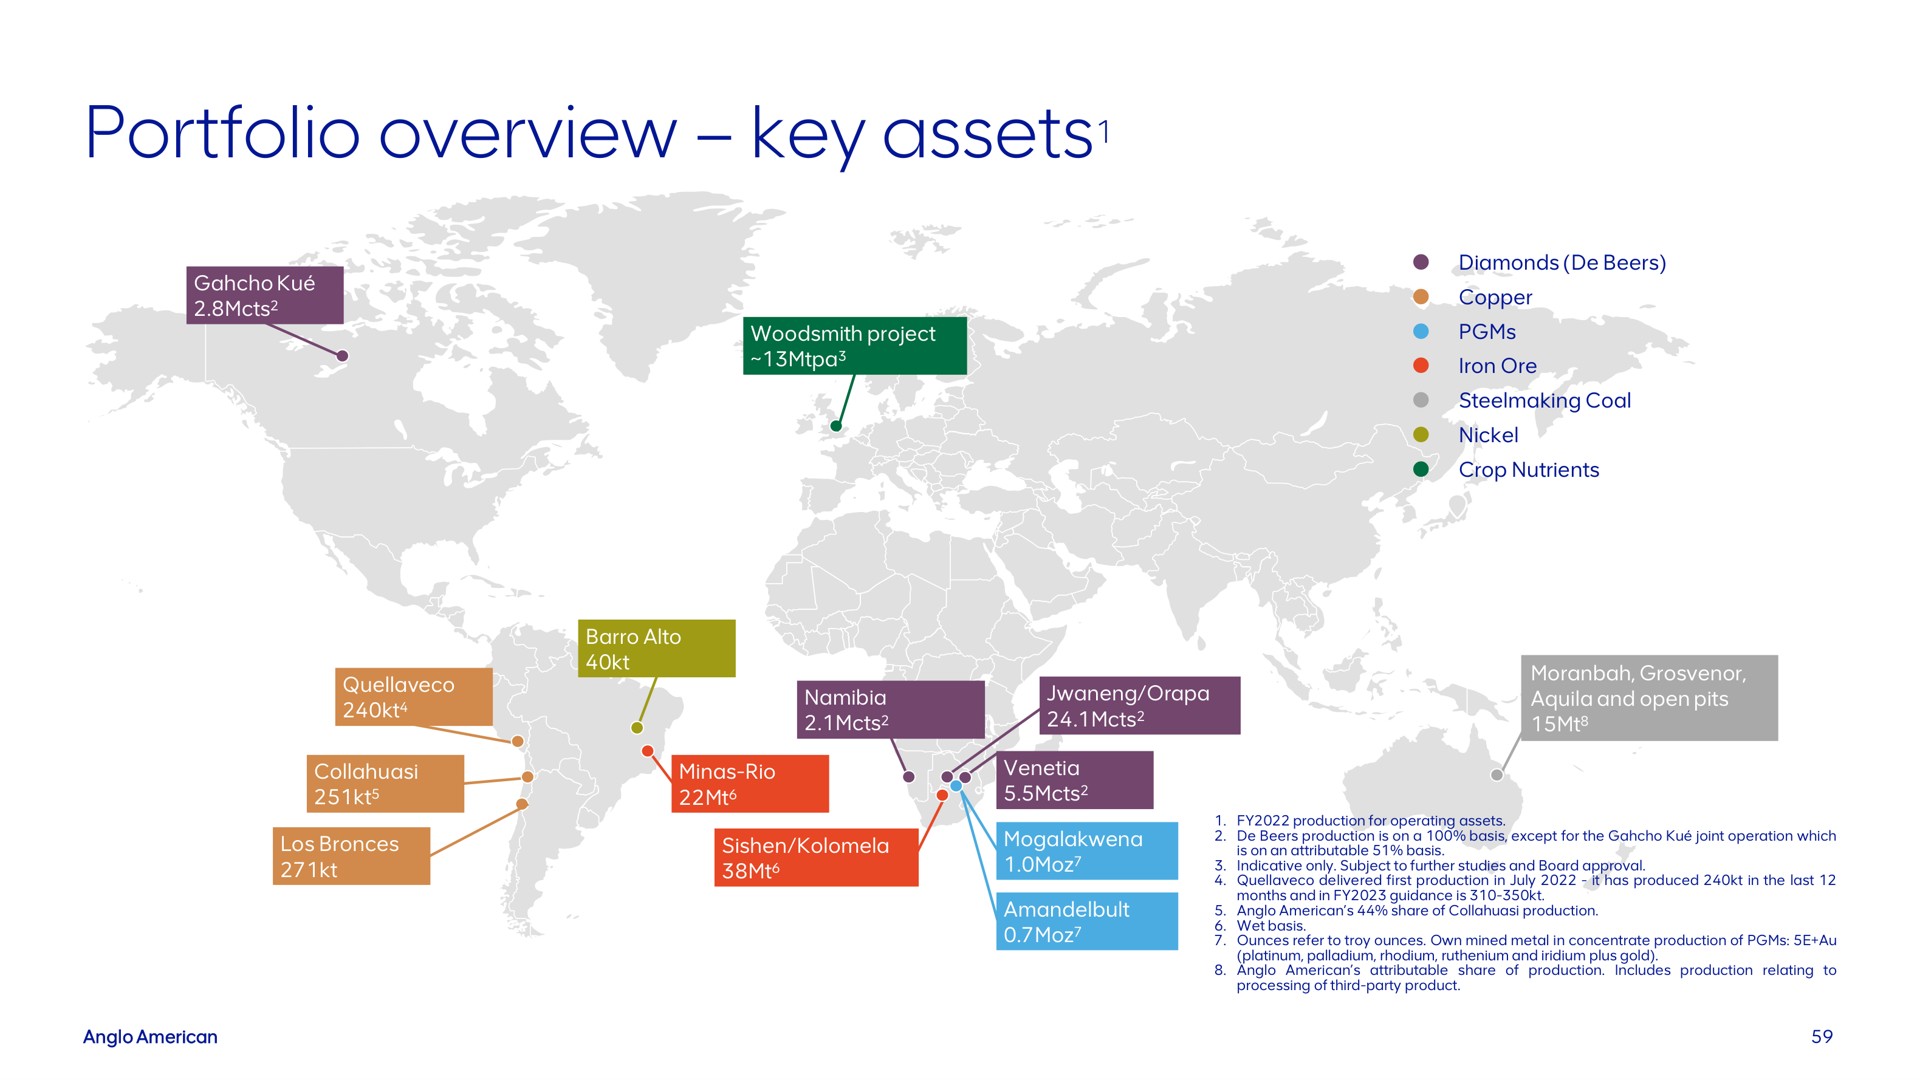 portfolio overview key assets assets | AngloAmerican